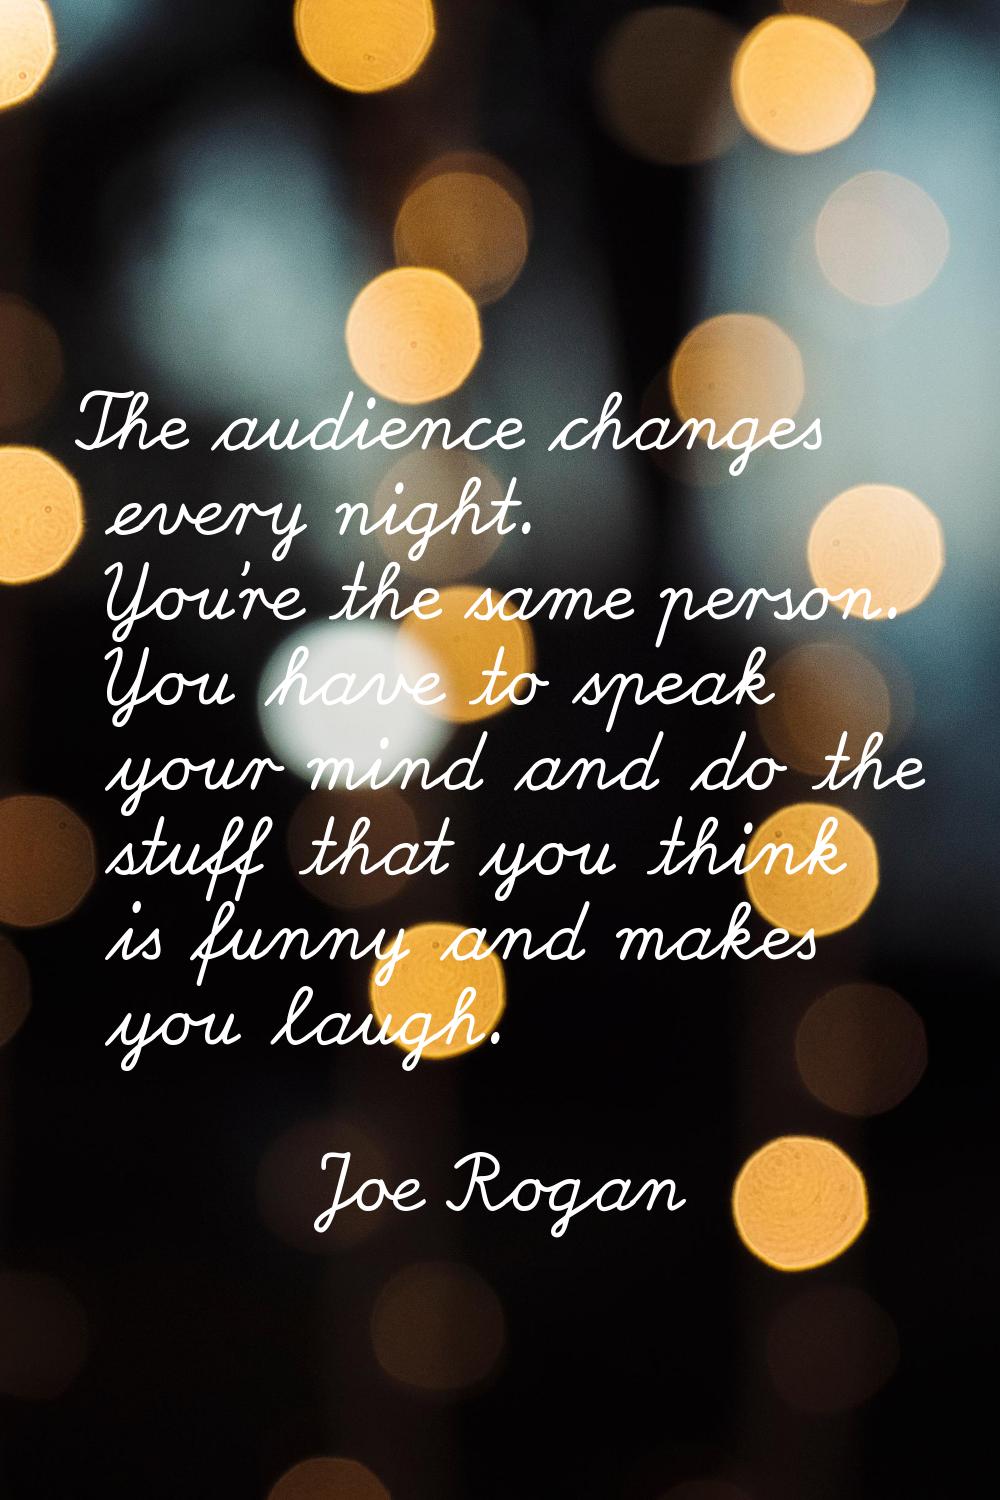 The audience changes every night. You're the same person. You have to speak your mind and do the st